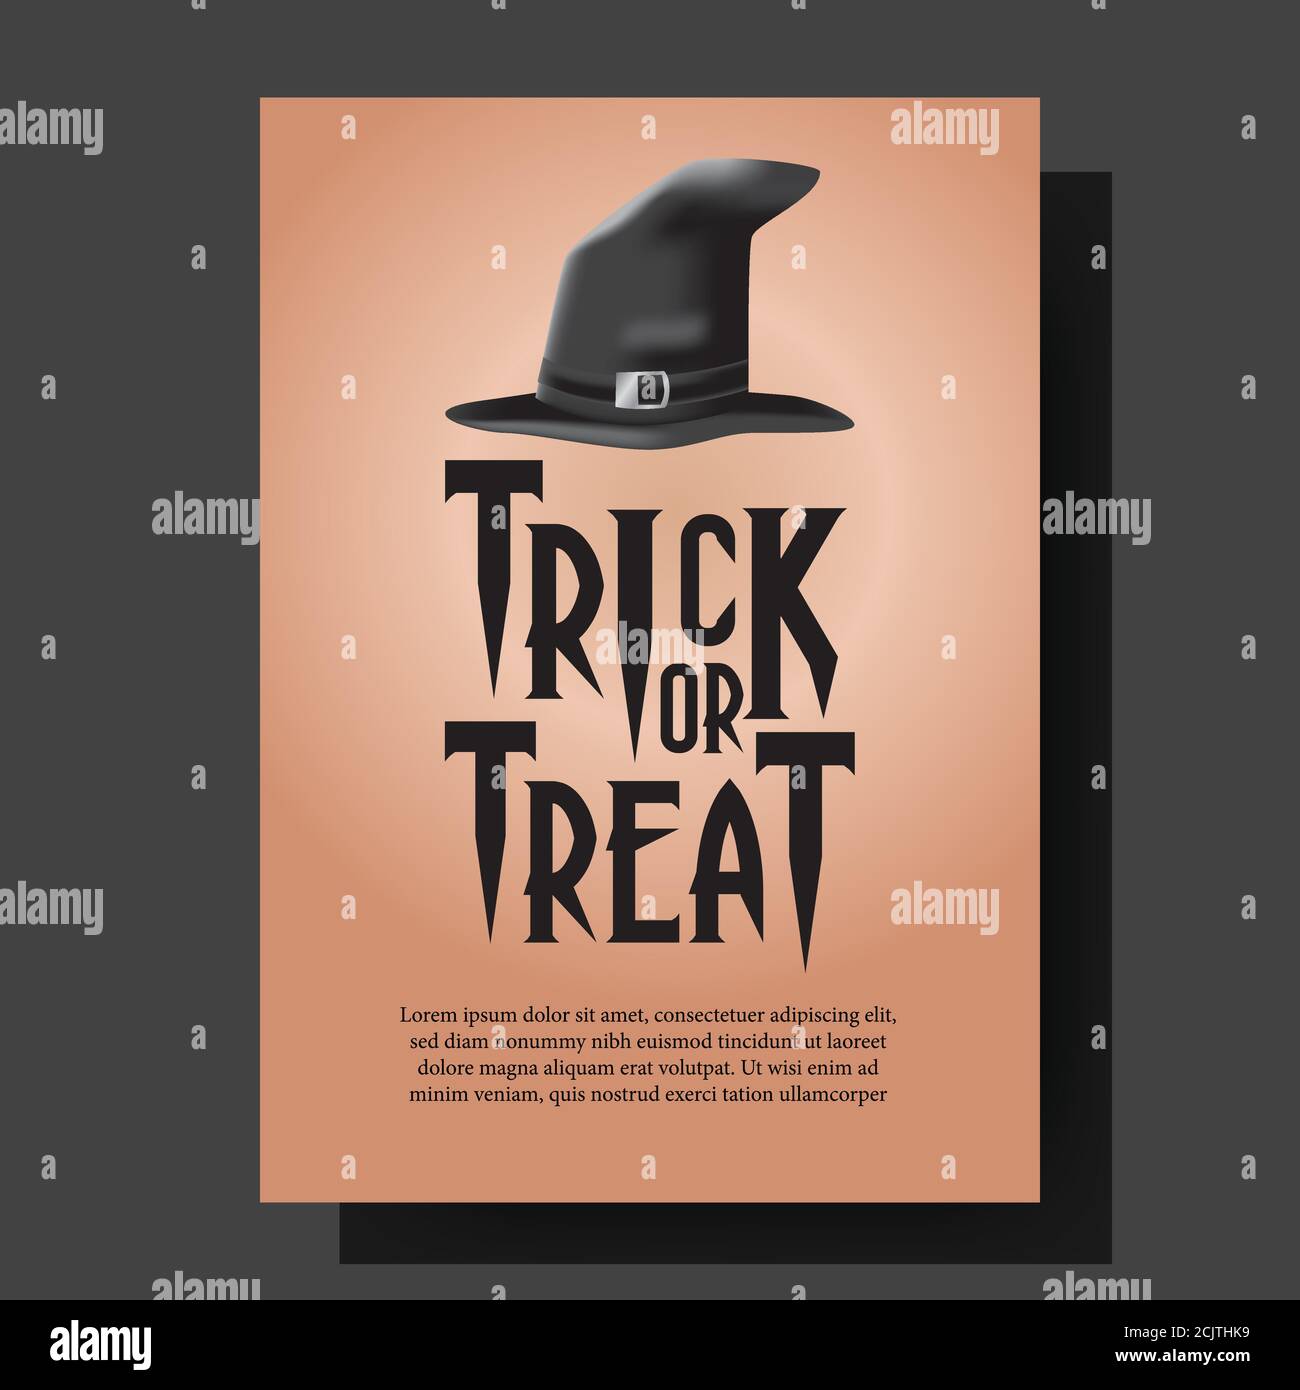 Trick or treat for halloween with illustration of wizard hat poster Stock Vector